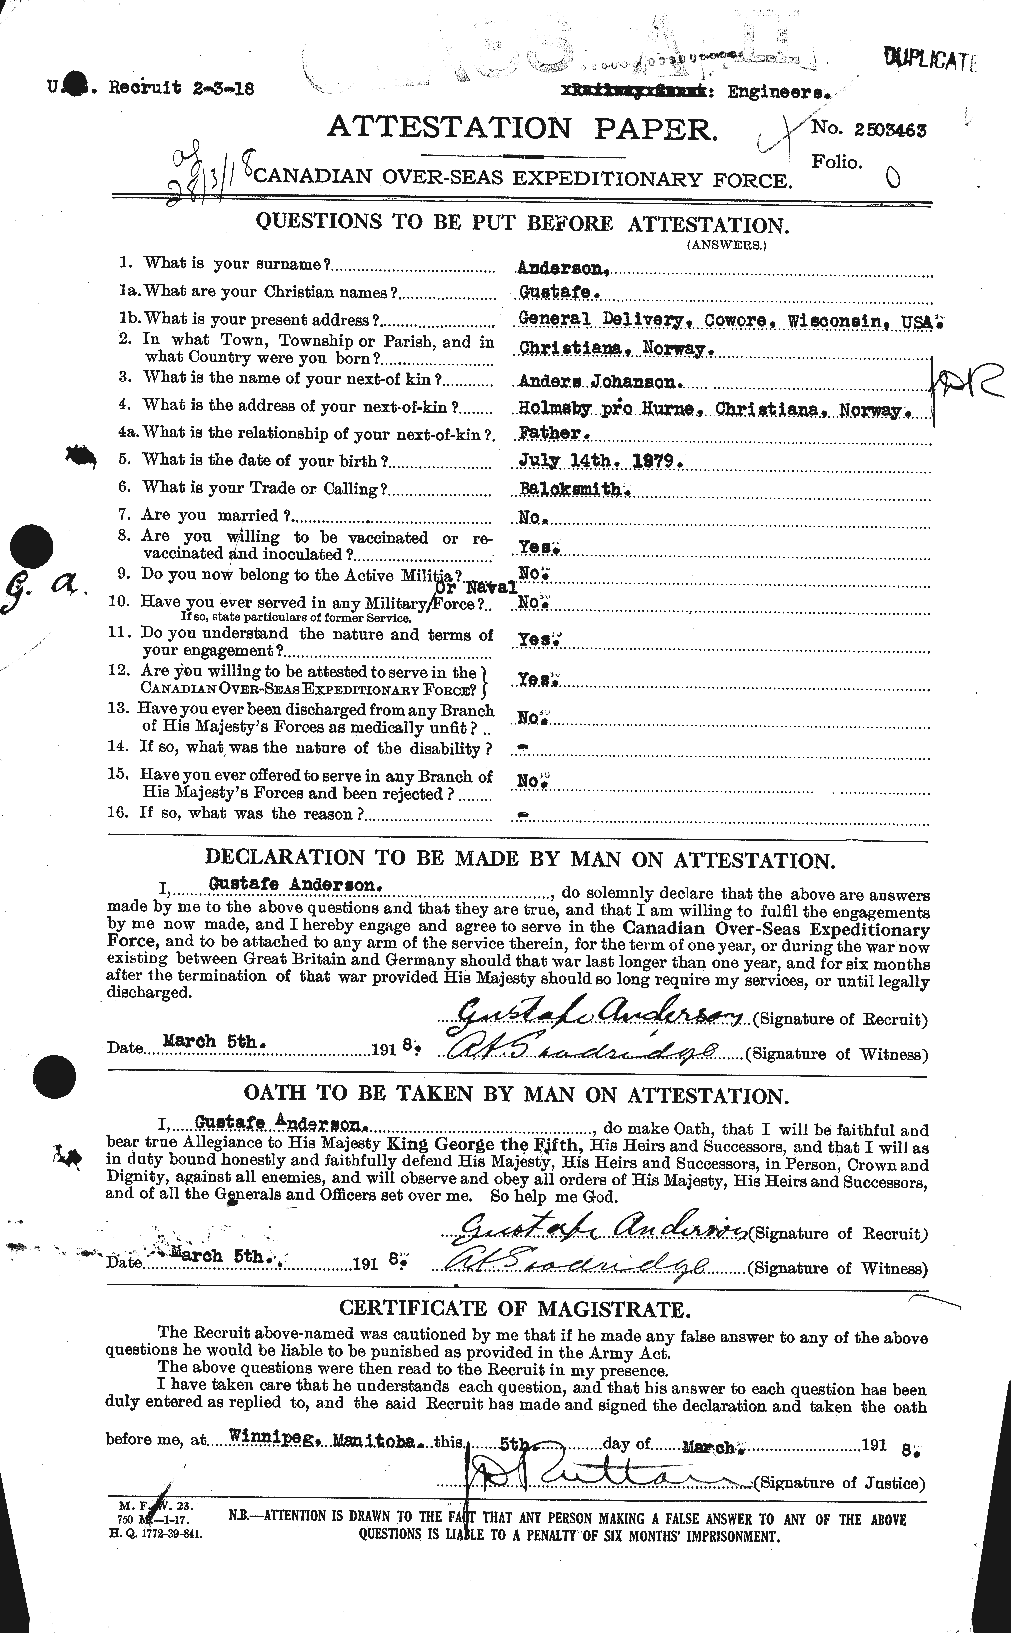 Personnel Records of the First World War - CEF 209647a